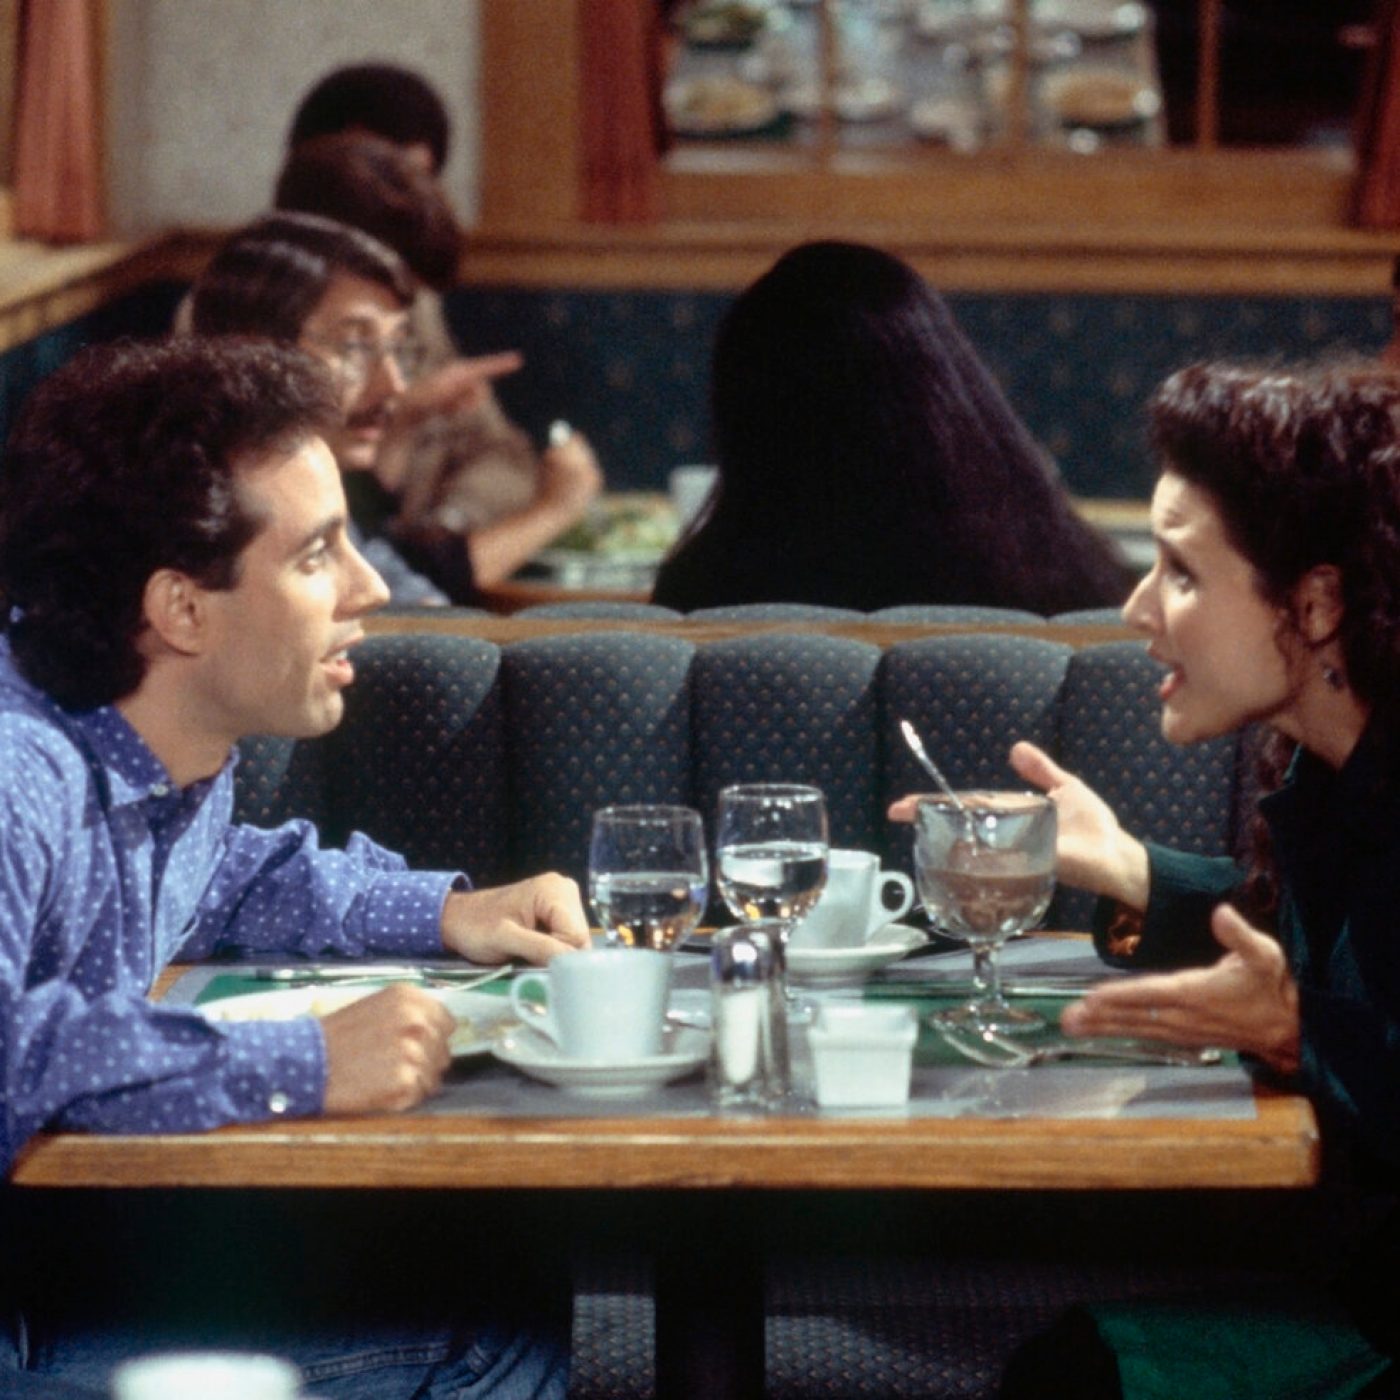 Jerry Seinfeld Working on Something for 'Seinfeld' Finale